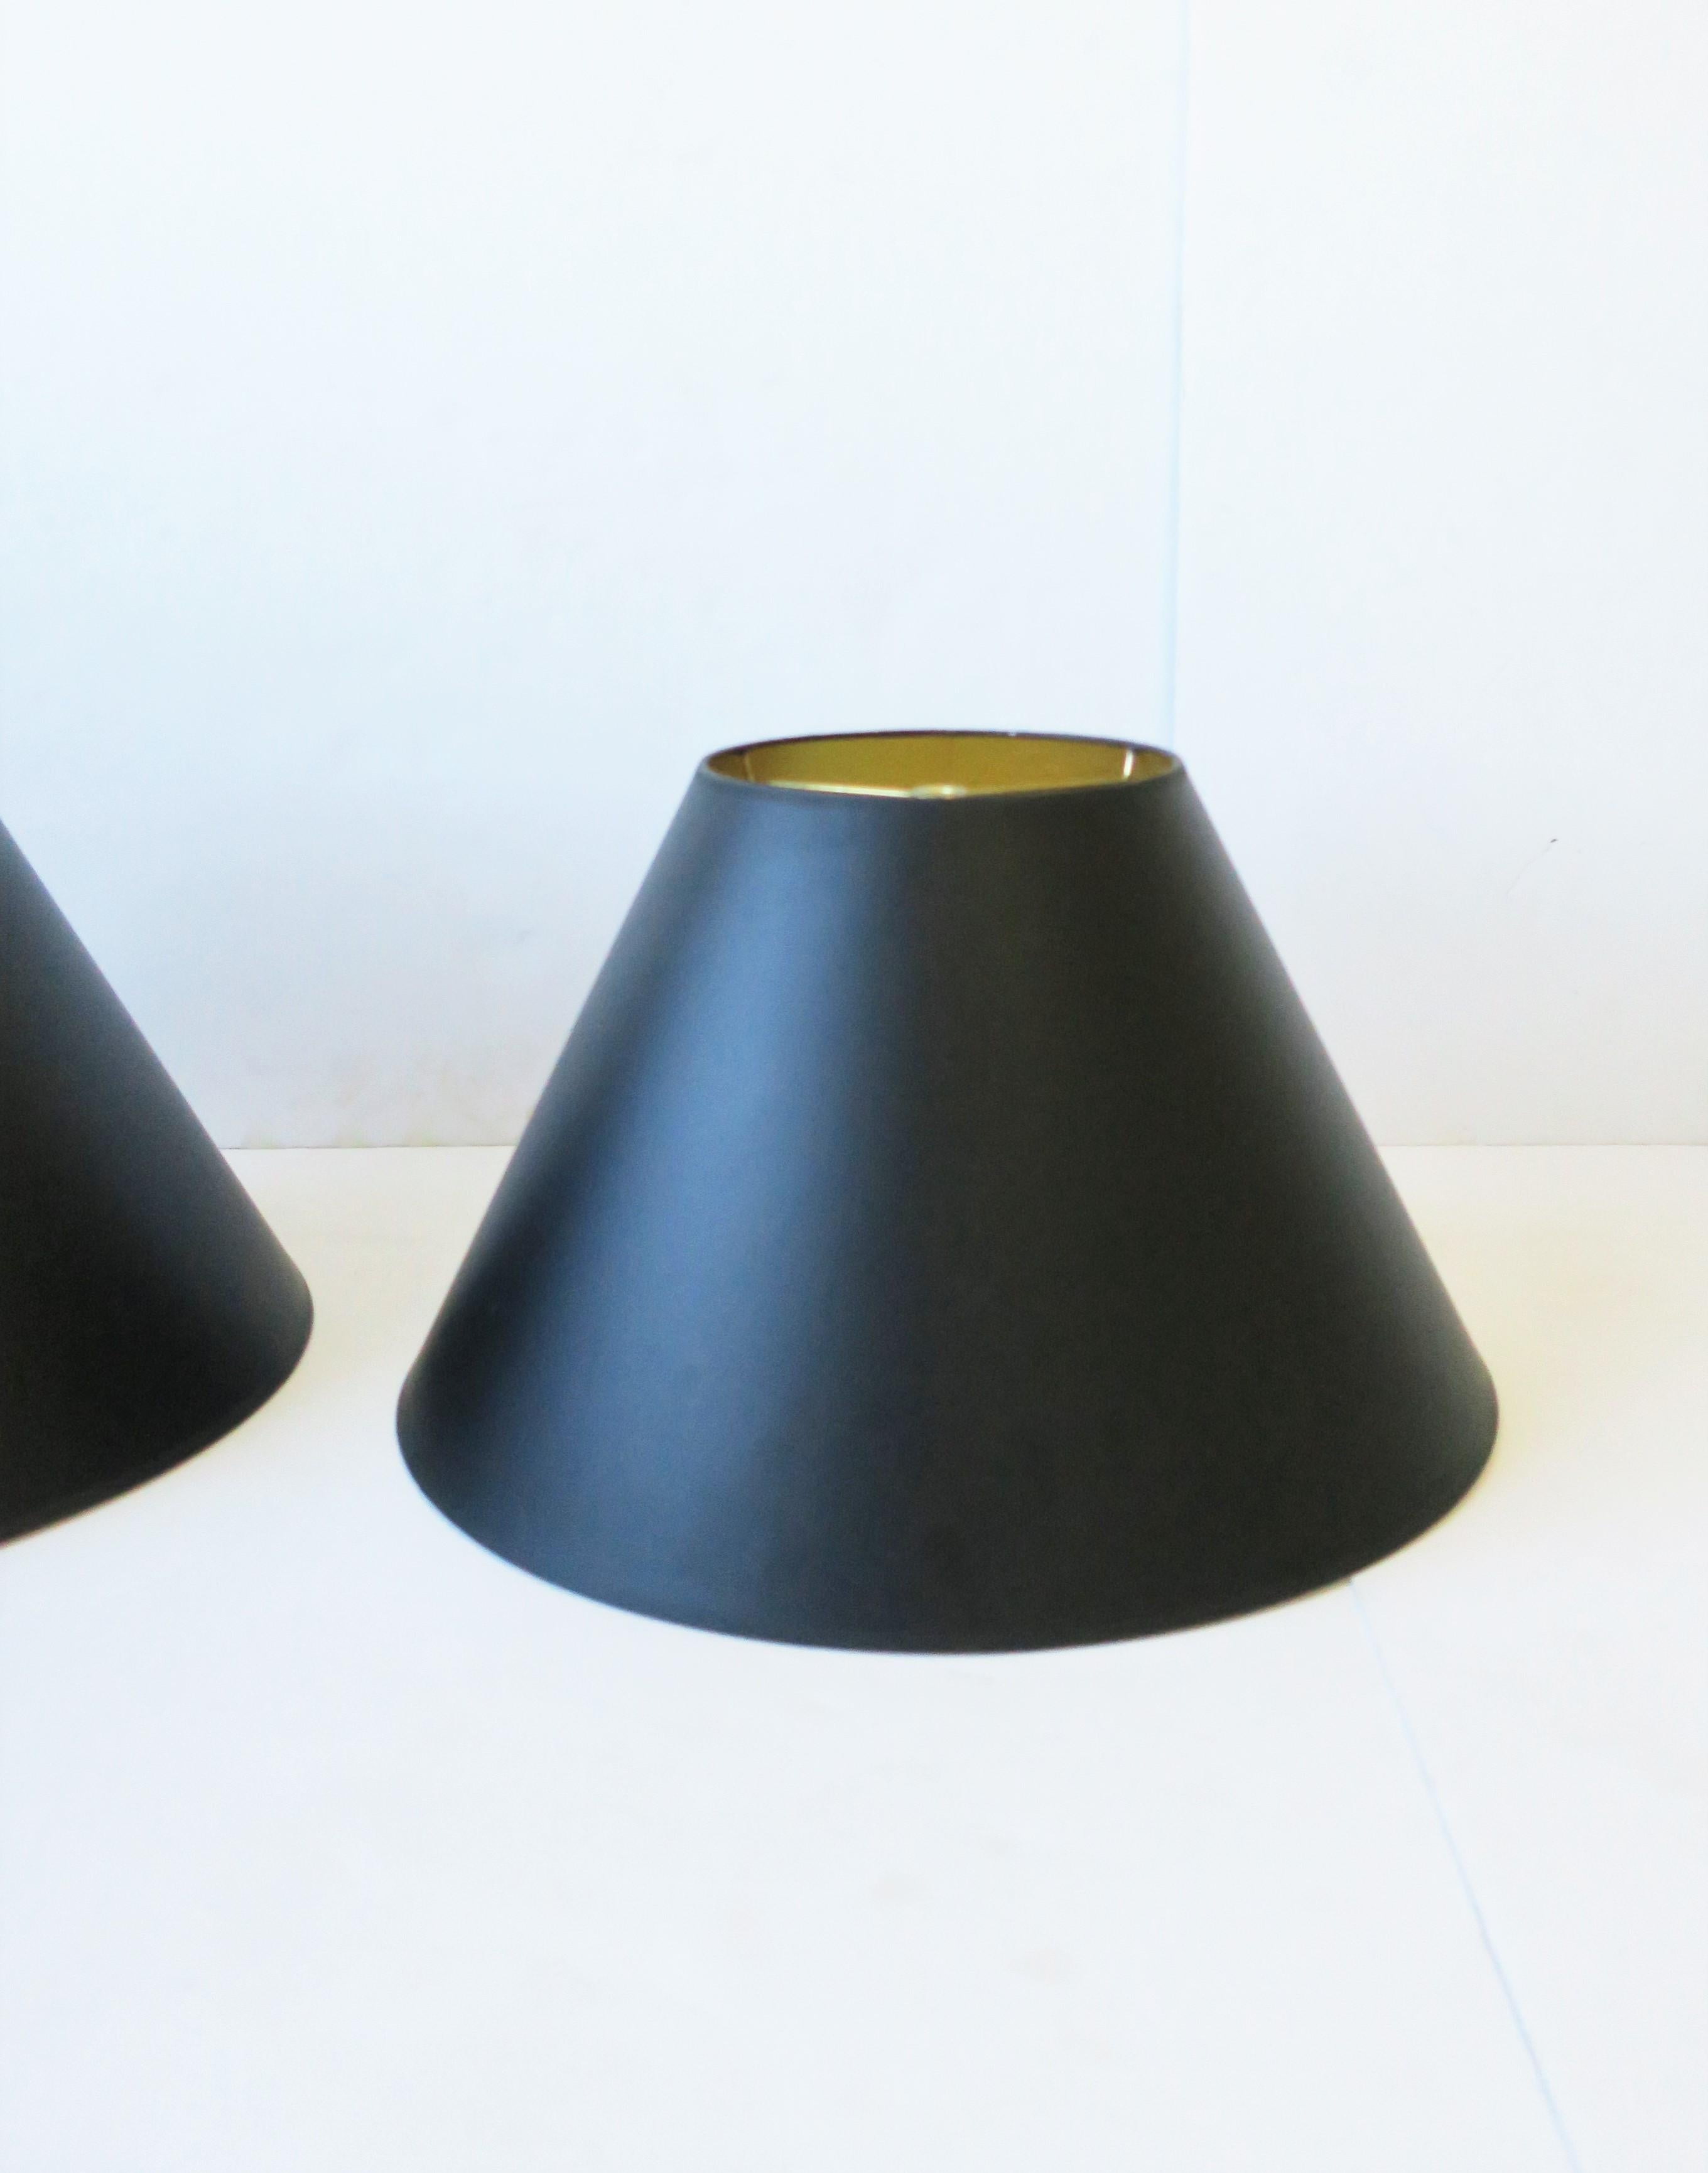 American Black Lamp Shades, Pair For Sale